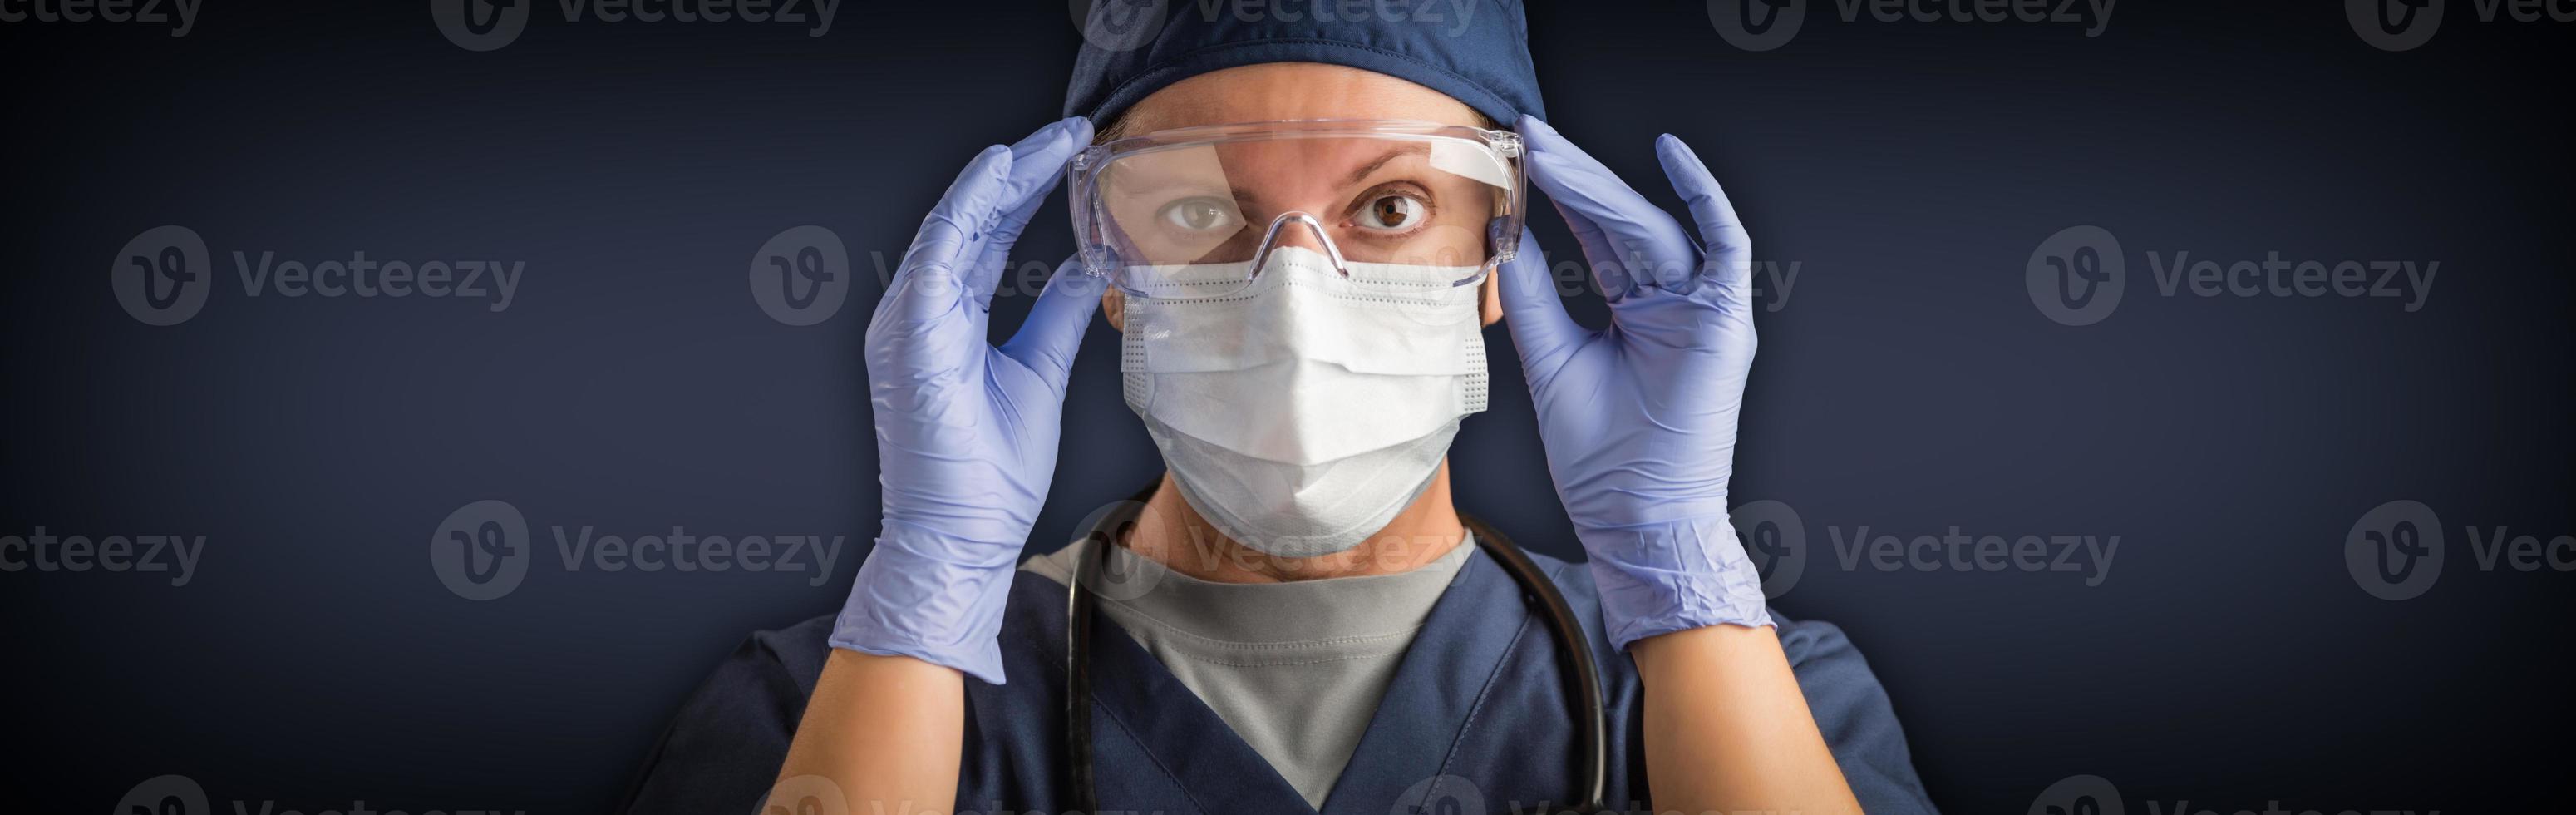 Banner of Female Doctor or Nurse In Medical Face Mask and Protective Gear photo